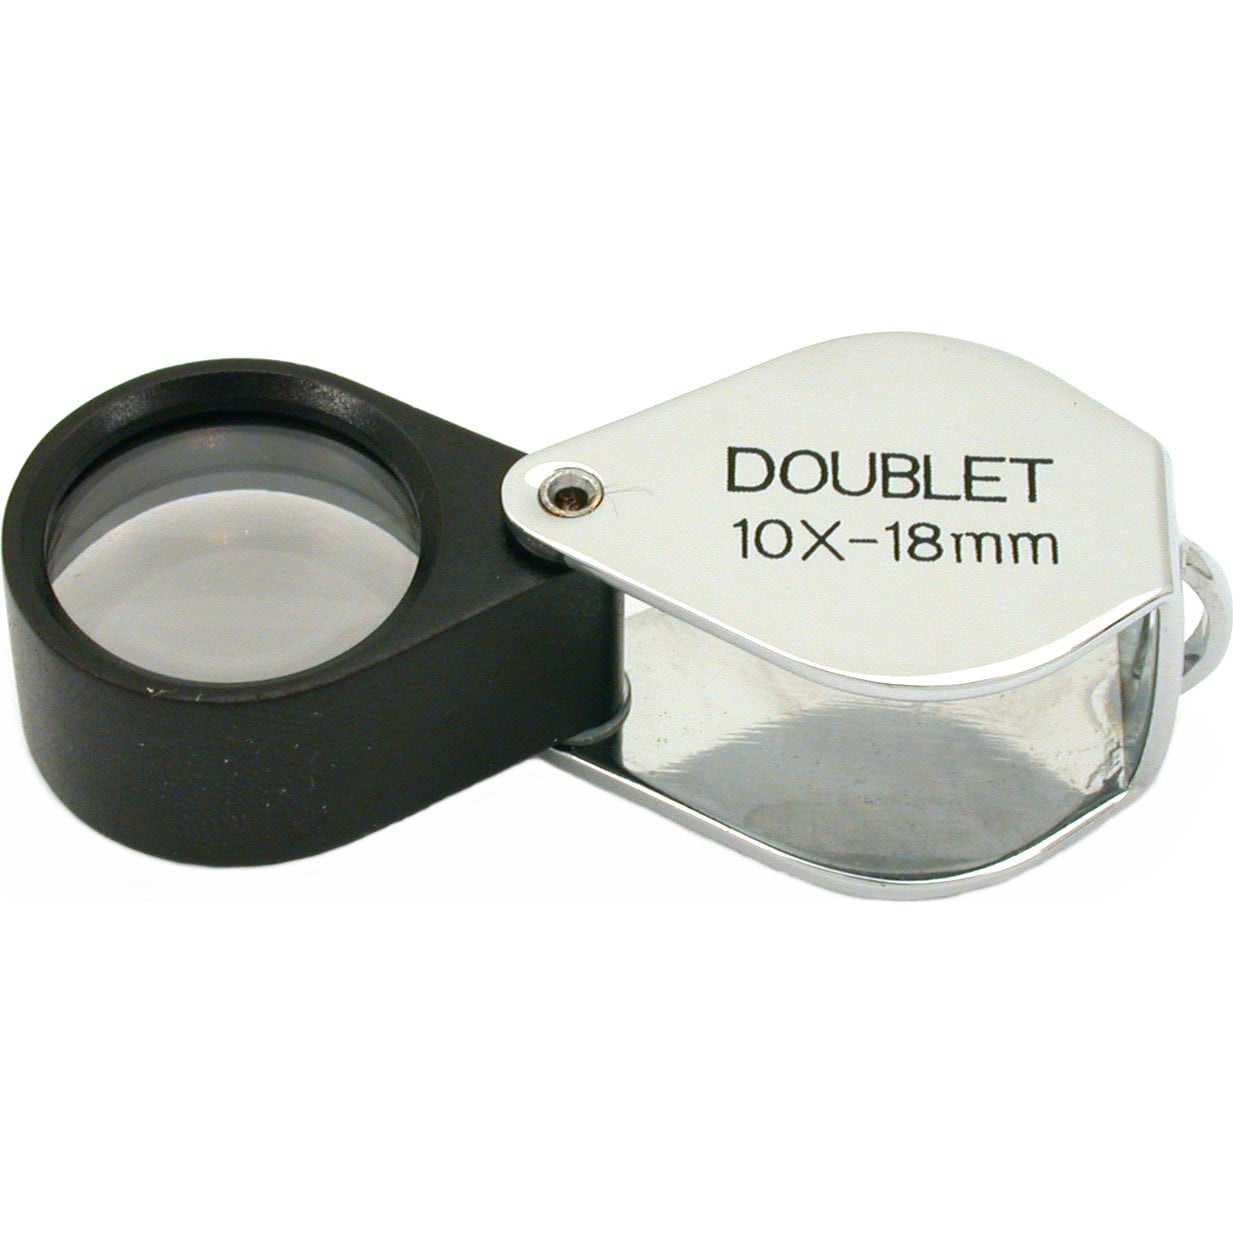 Noa Store 10x Jewelers Loupe Set - 2 Magnifiers for Jewelers &  Photographers, 3.54 H 2.44 L 1.14 W - Dillons Food Stores